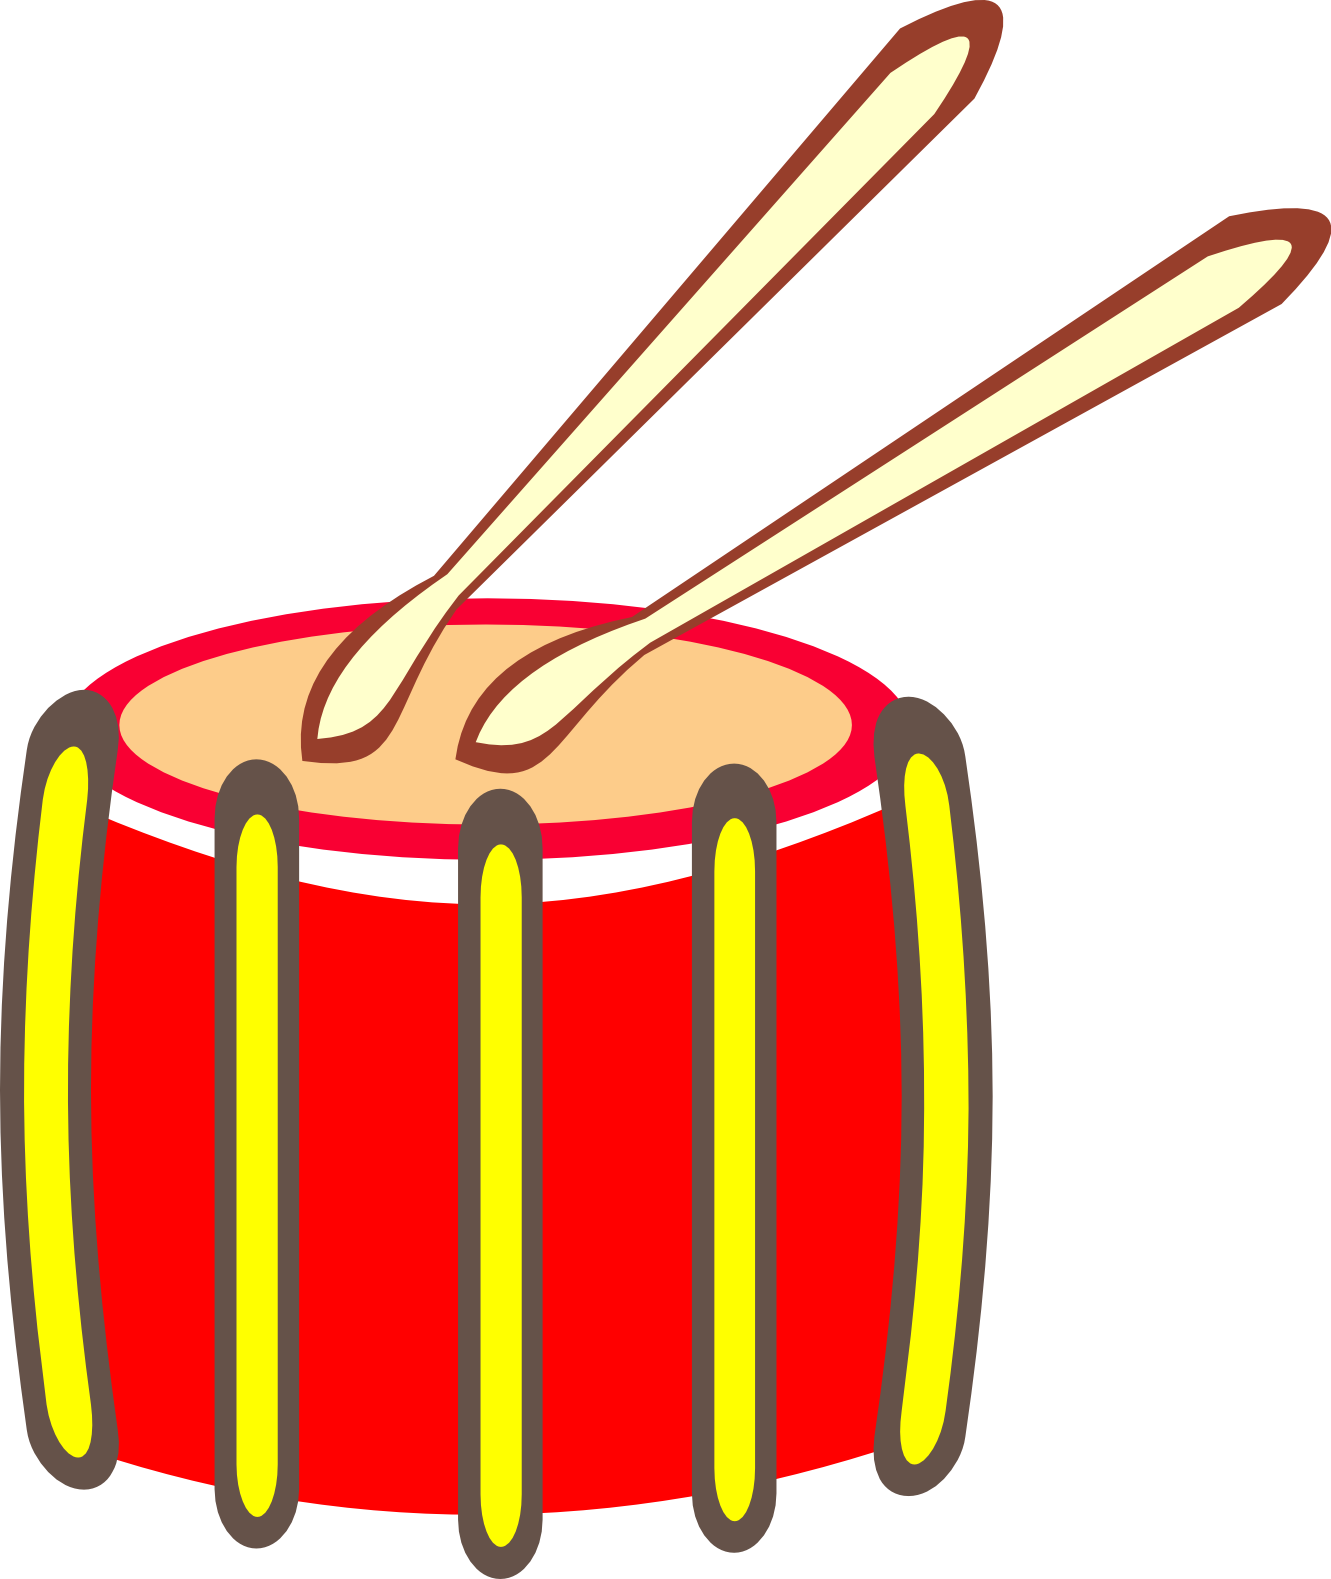 Drums Clip Art   Images   Free For Commercial Use